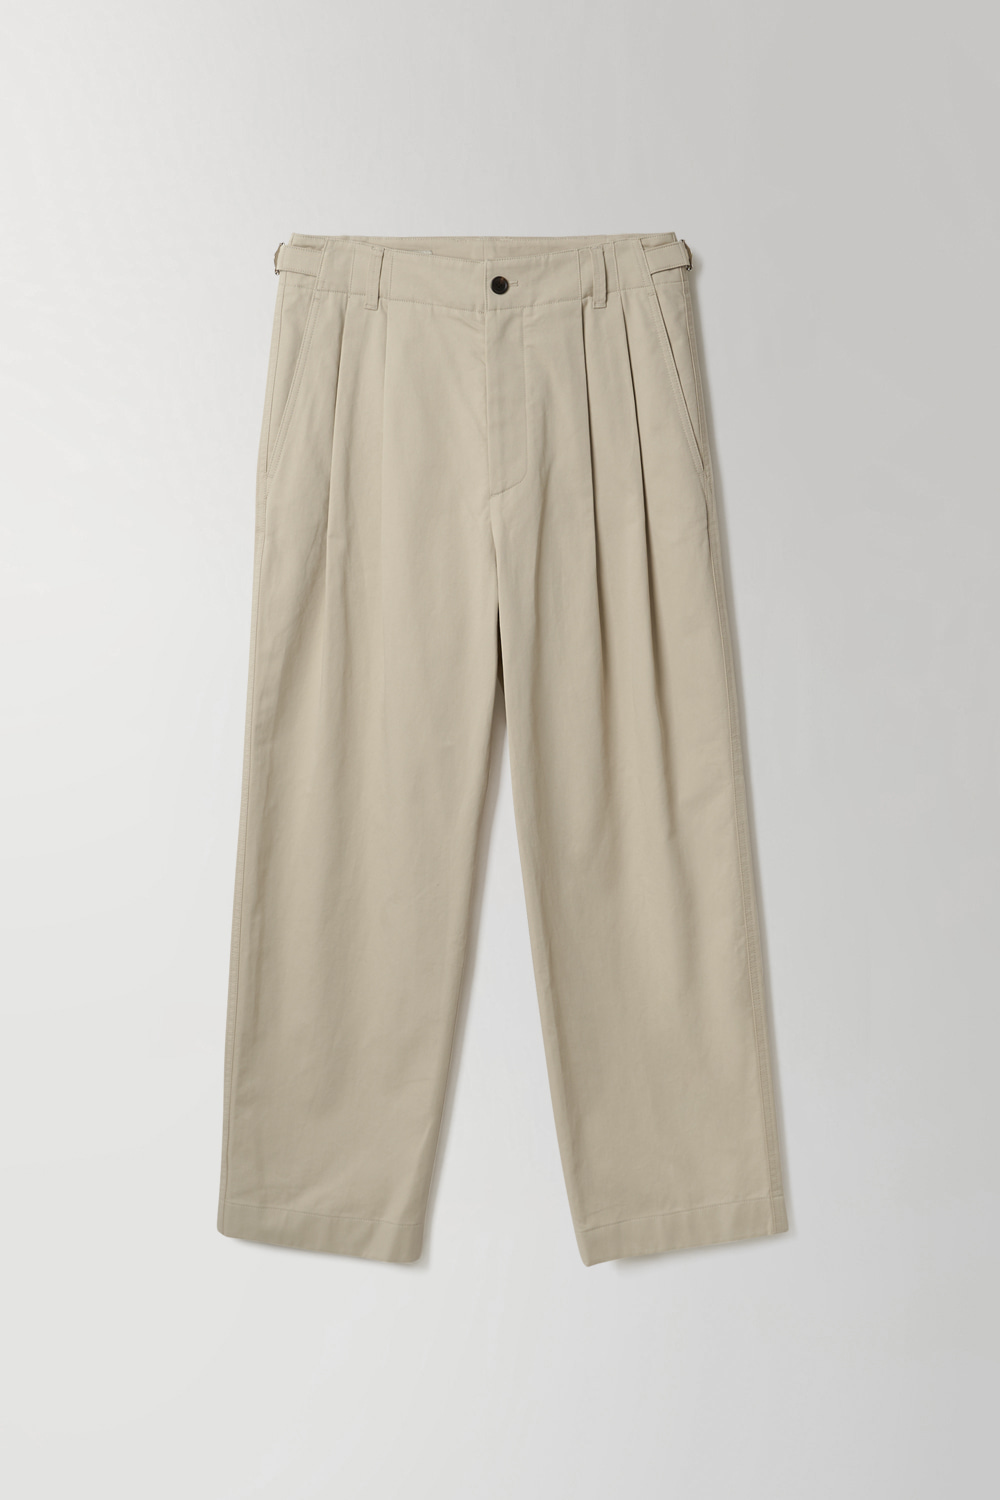 [2ND] TRAVELLER CHINO PANTS (TYPE1) - SAND BEIGE